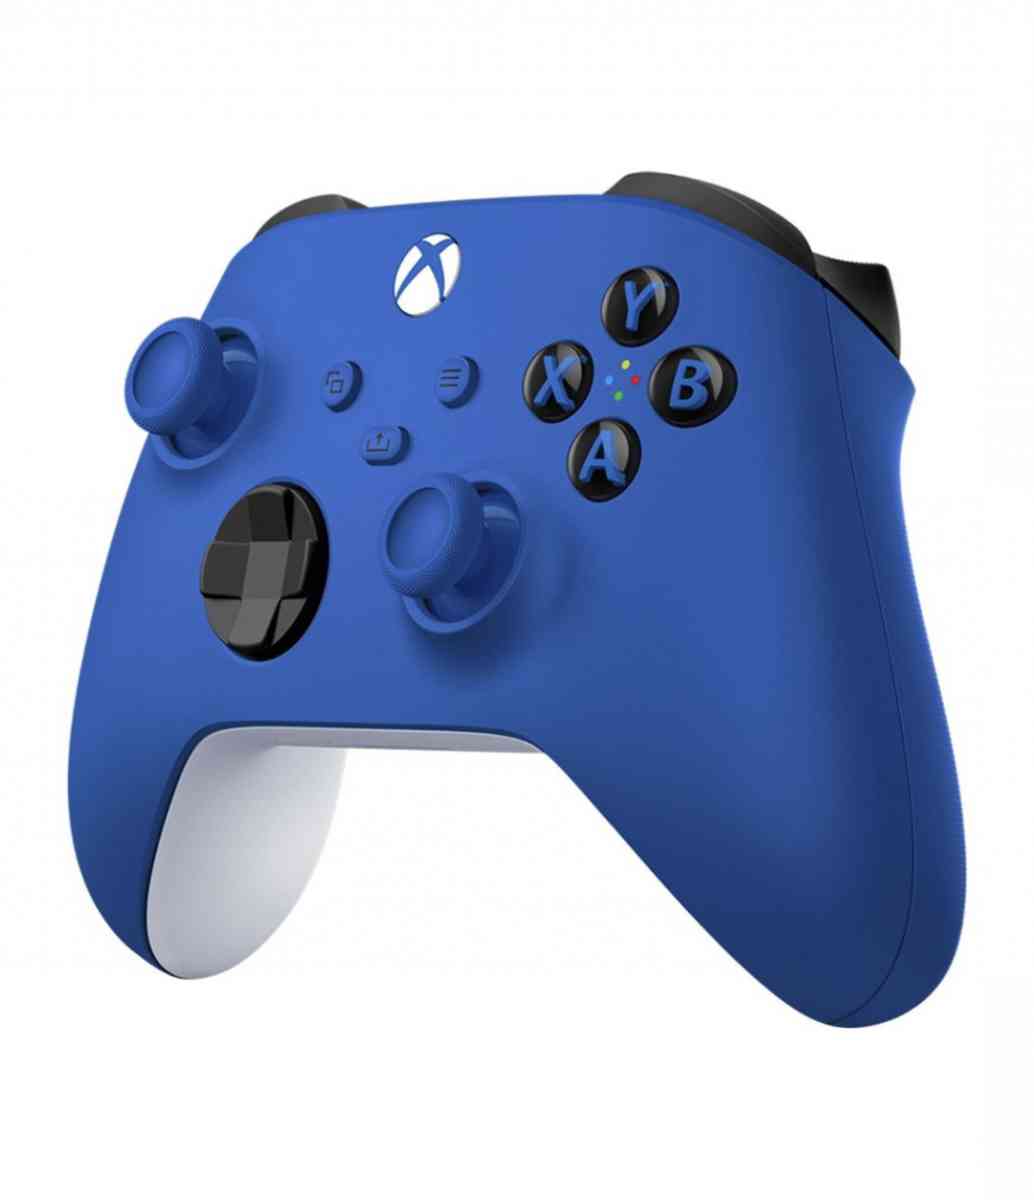 Shock Blue Xbox series x or S controller